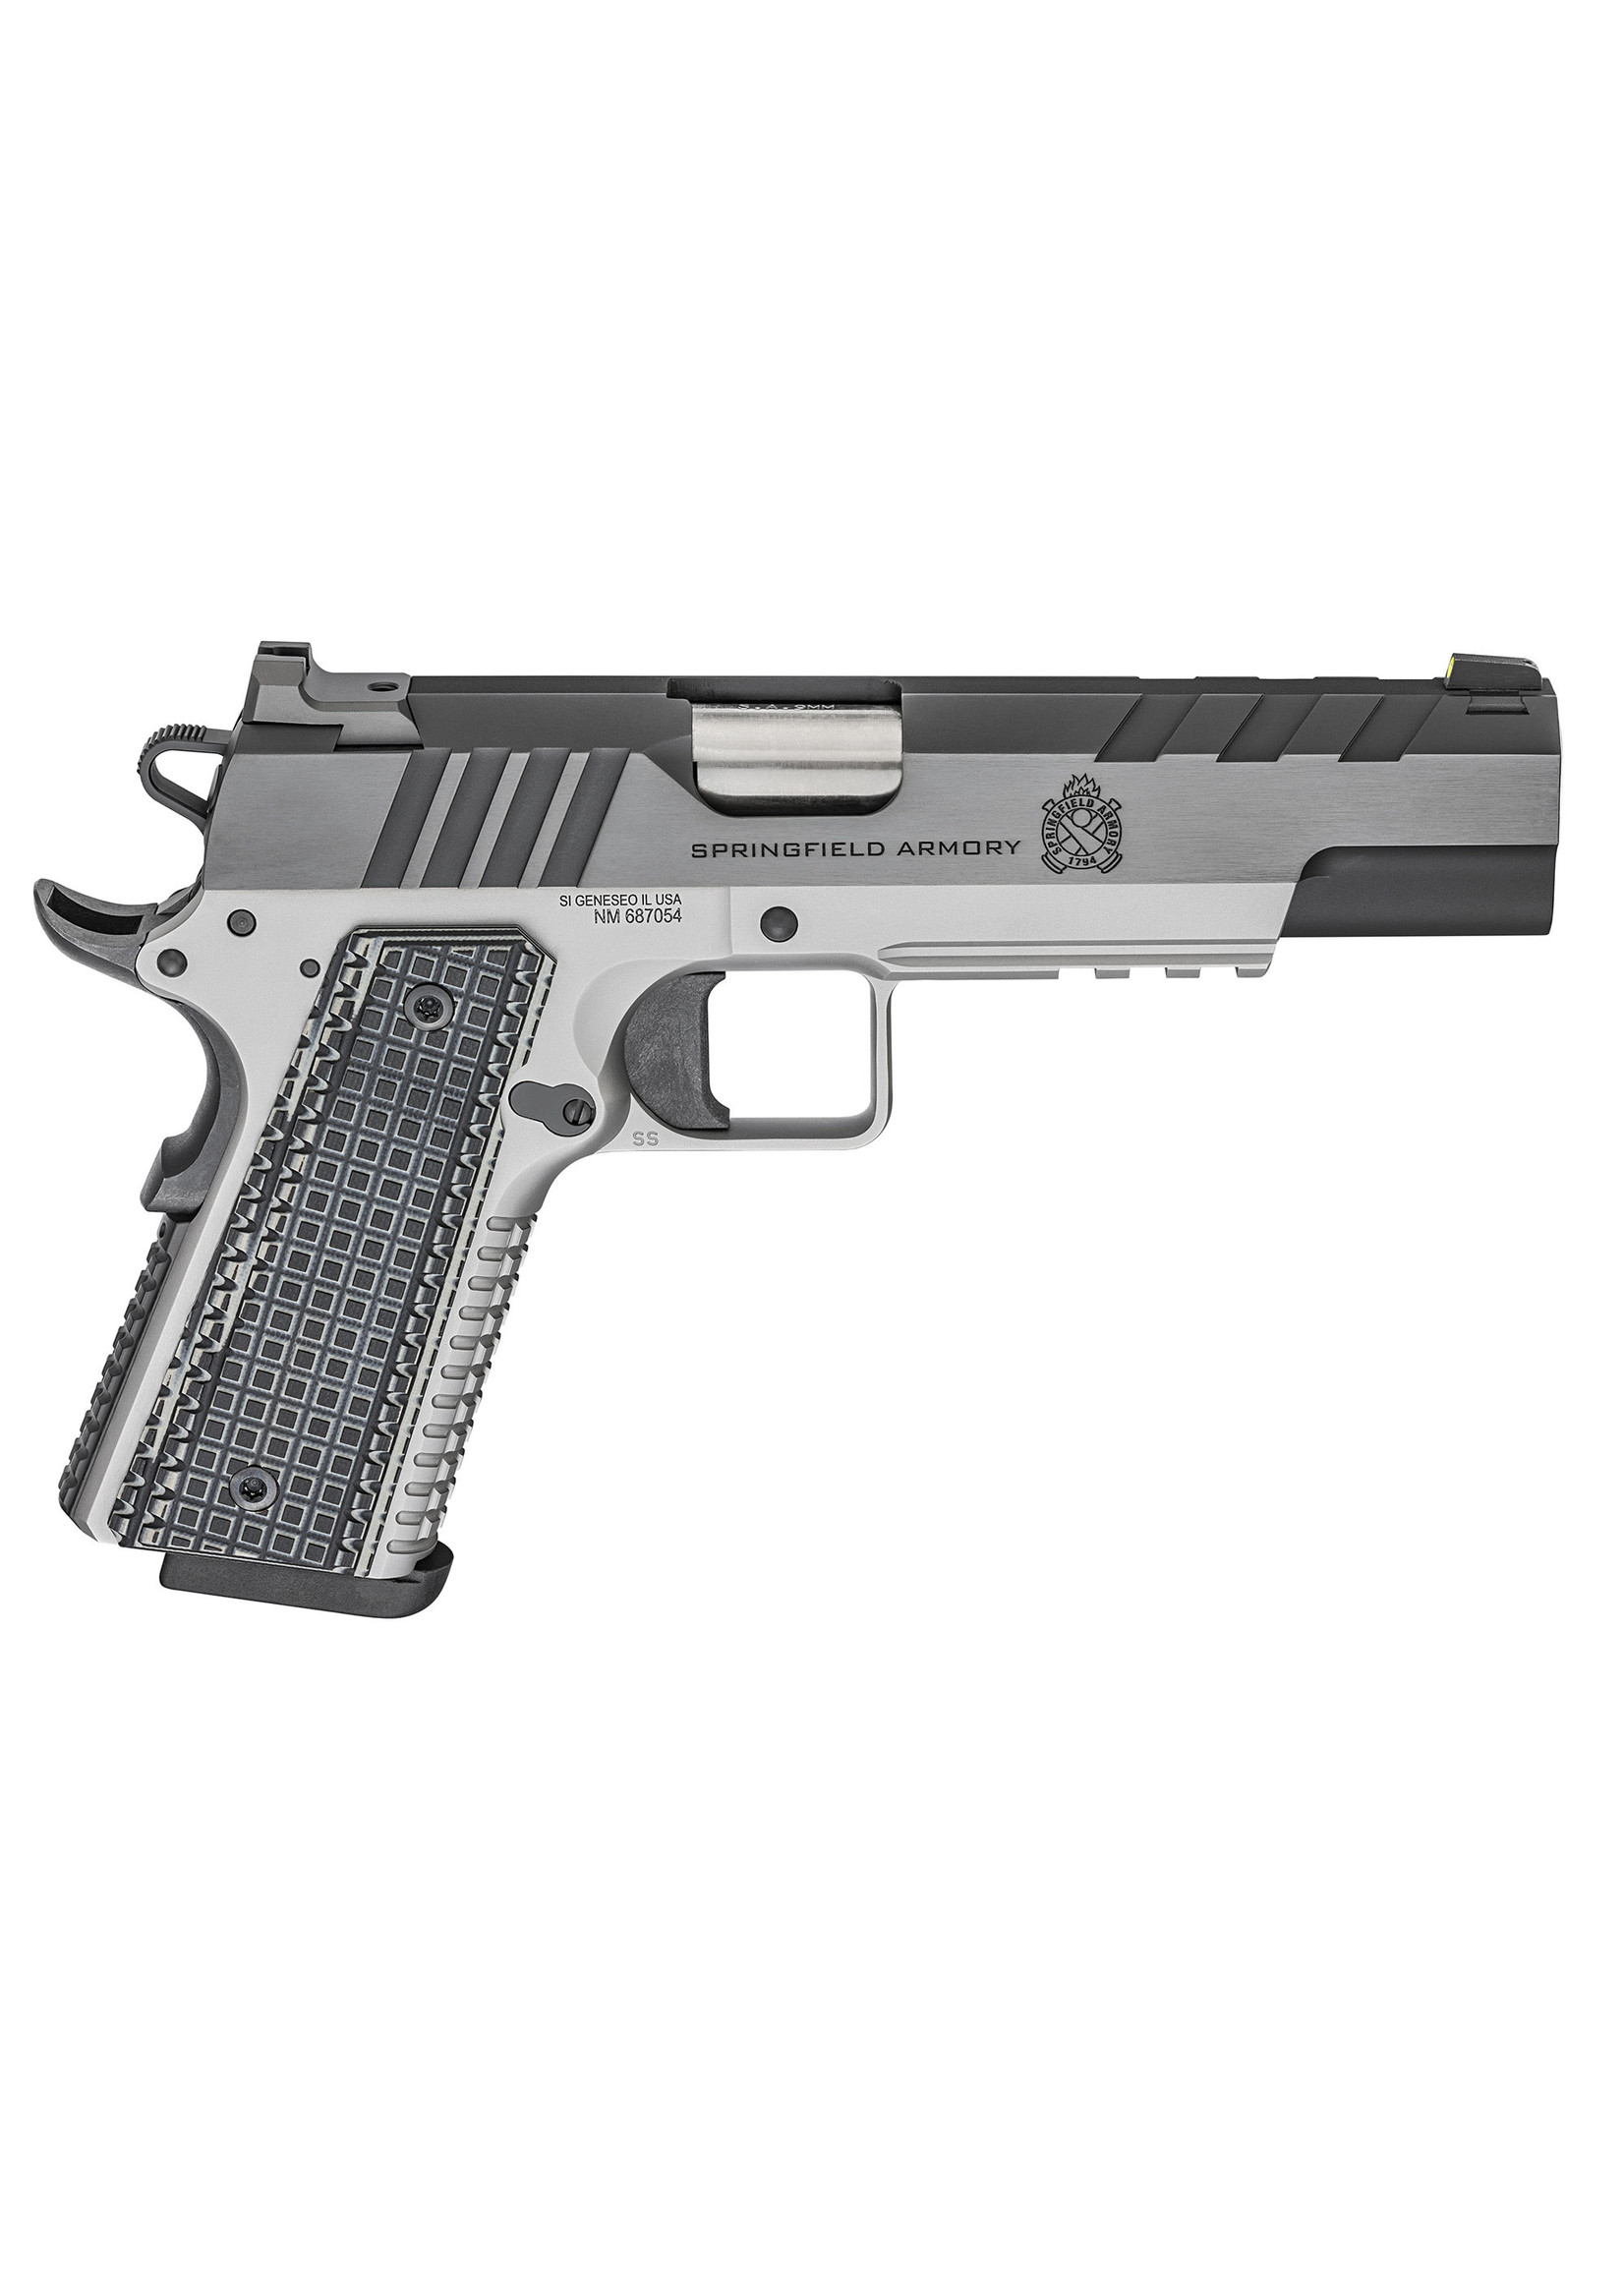 Springfield Armory Springfield Armory PX9217L 1911 Emissary 9mm Luger 9+1 4.25" Bull Barrel, Stainless Steel Frame w/ Beavertail, Serrated Blued Carbon Steel Slide, Black VZ Thin-Line G10 Grip